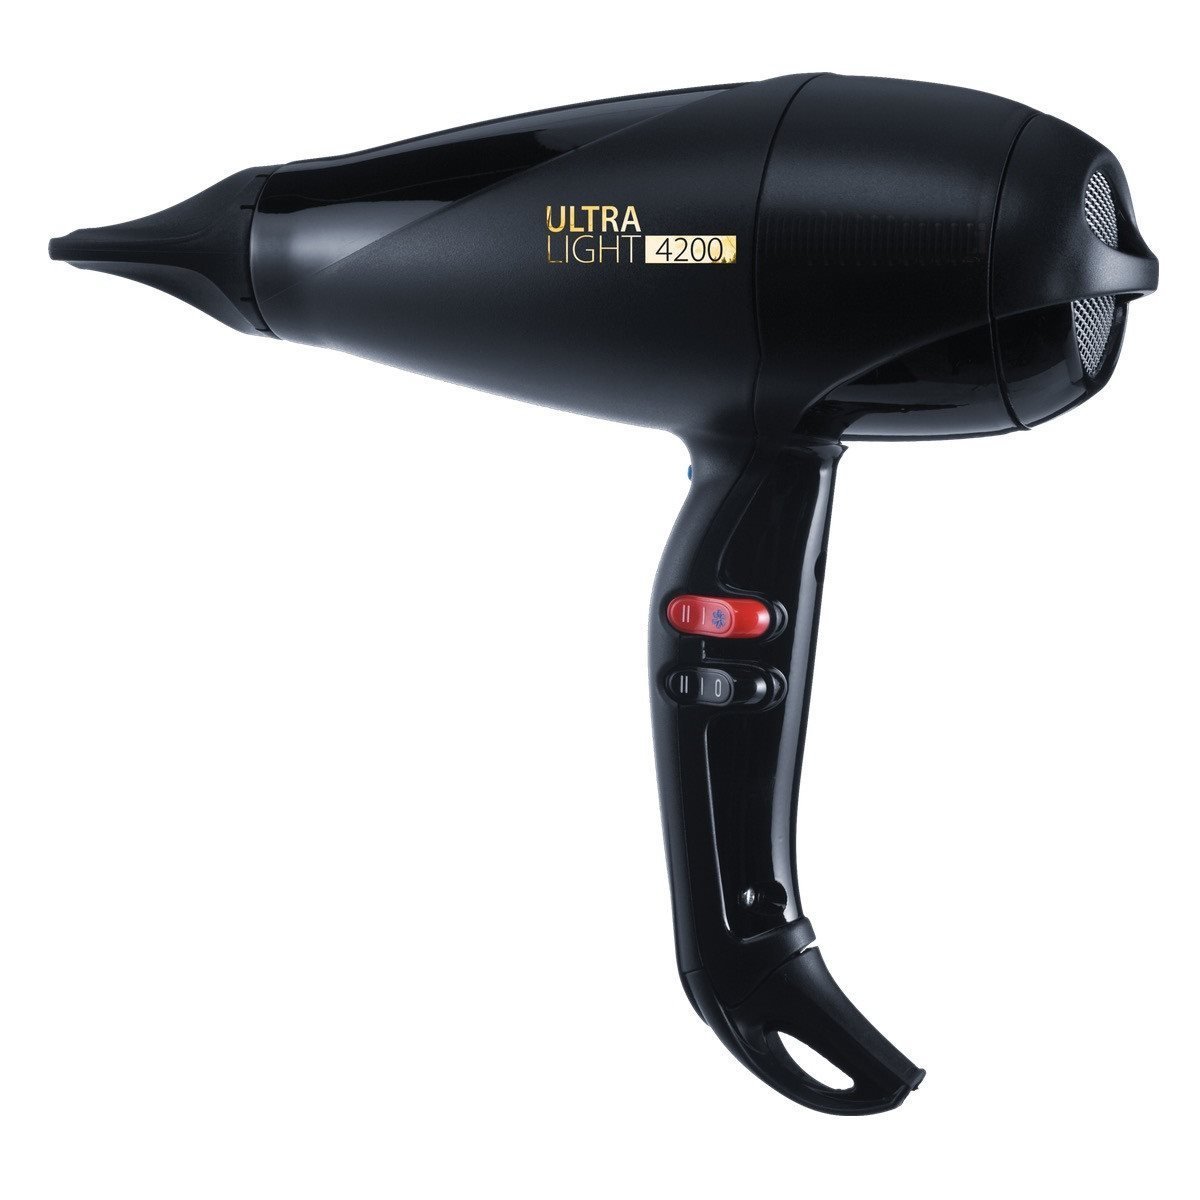 Ultra Light 4500 Salon Professional Hair Dryer - by Ceriotti (Formerly Aphrodite) - beautyhair.co.ukElectricals